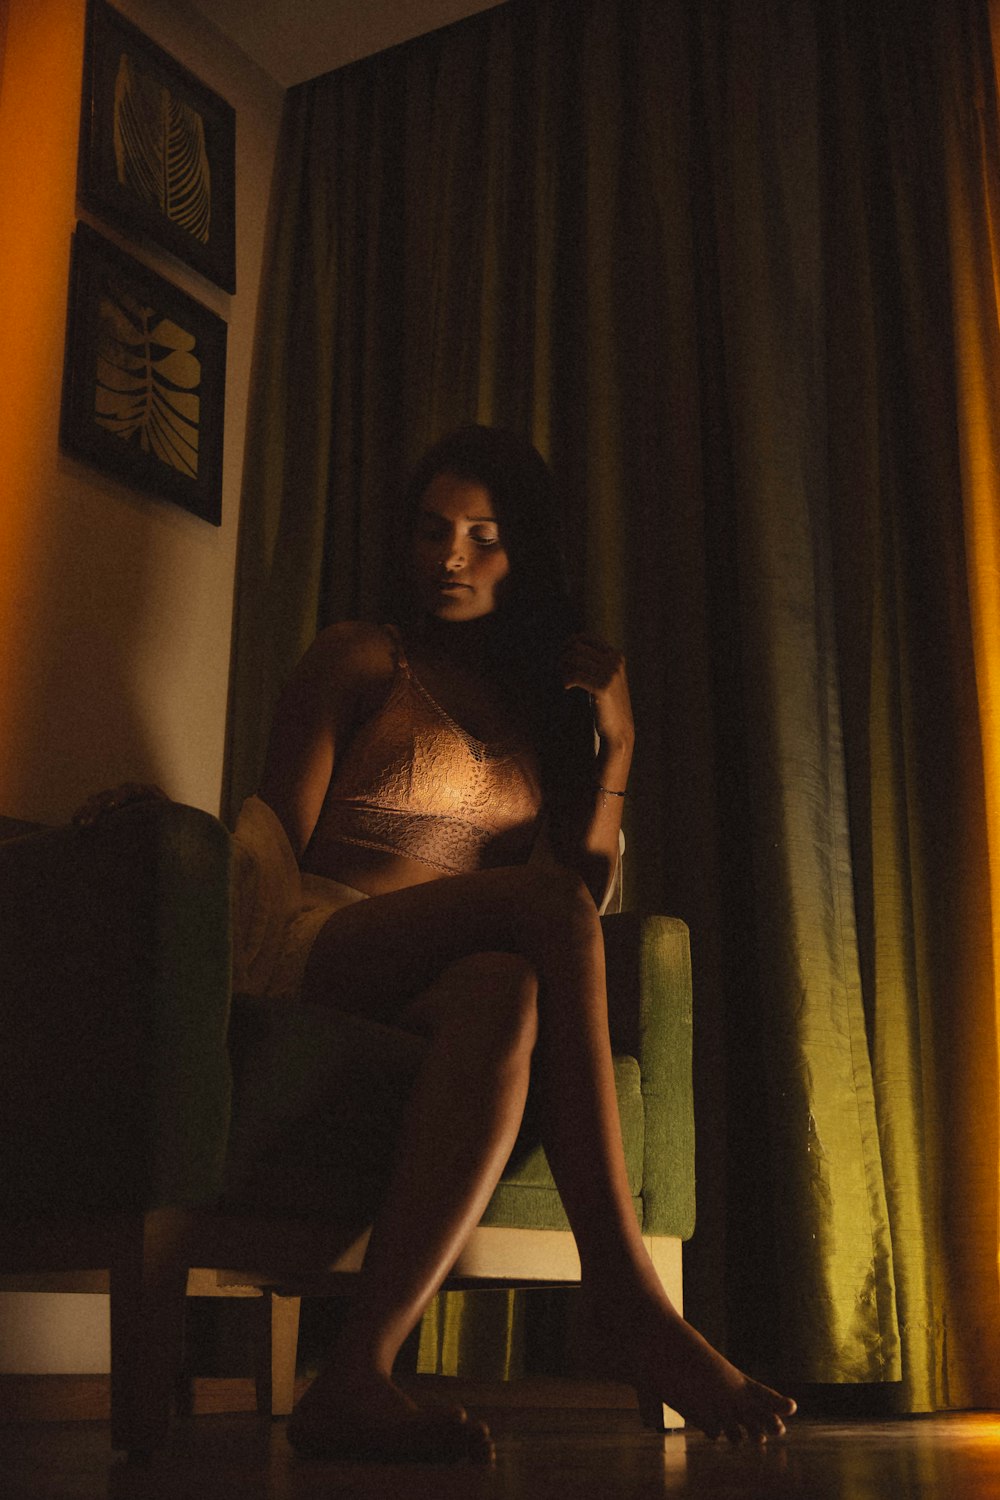 a woman sitting on a chair in a dimly lit room